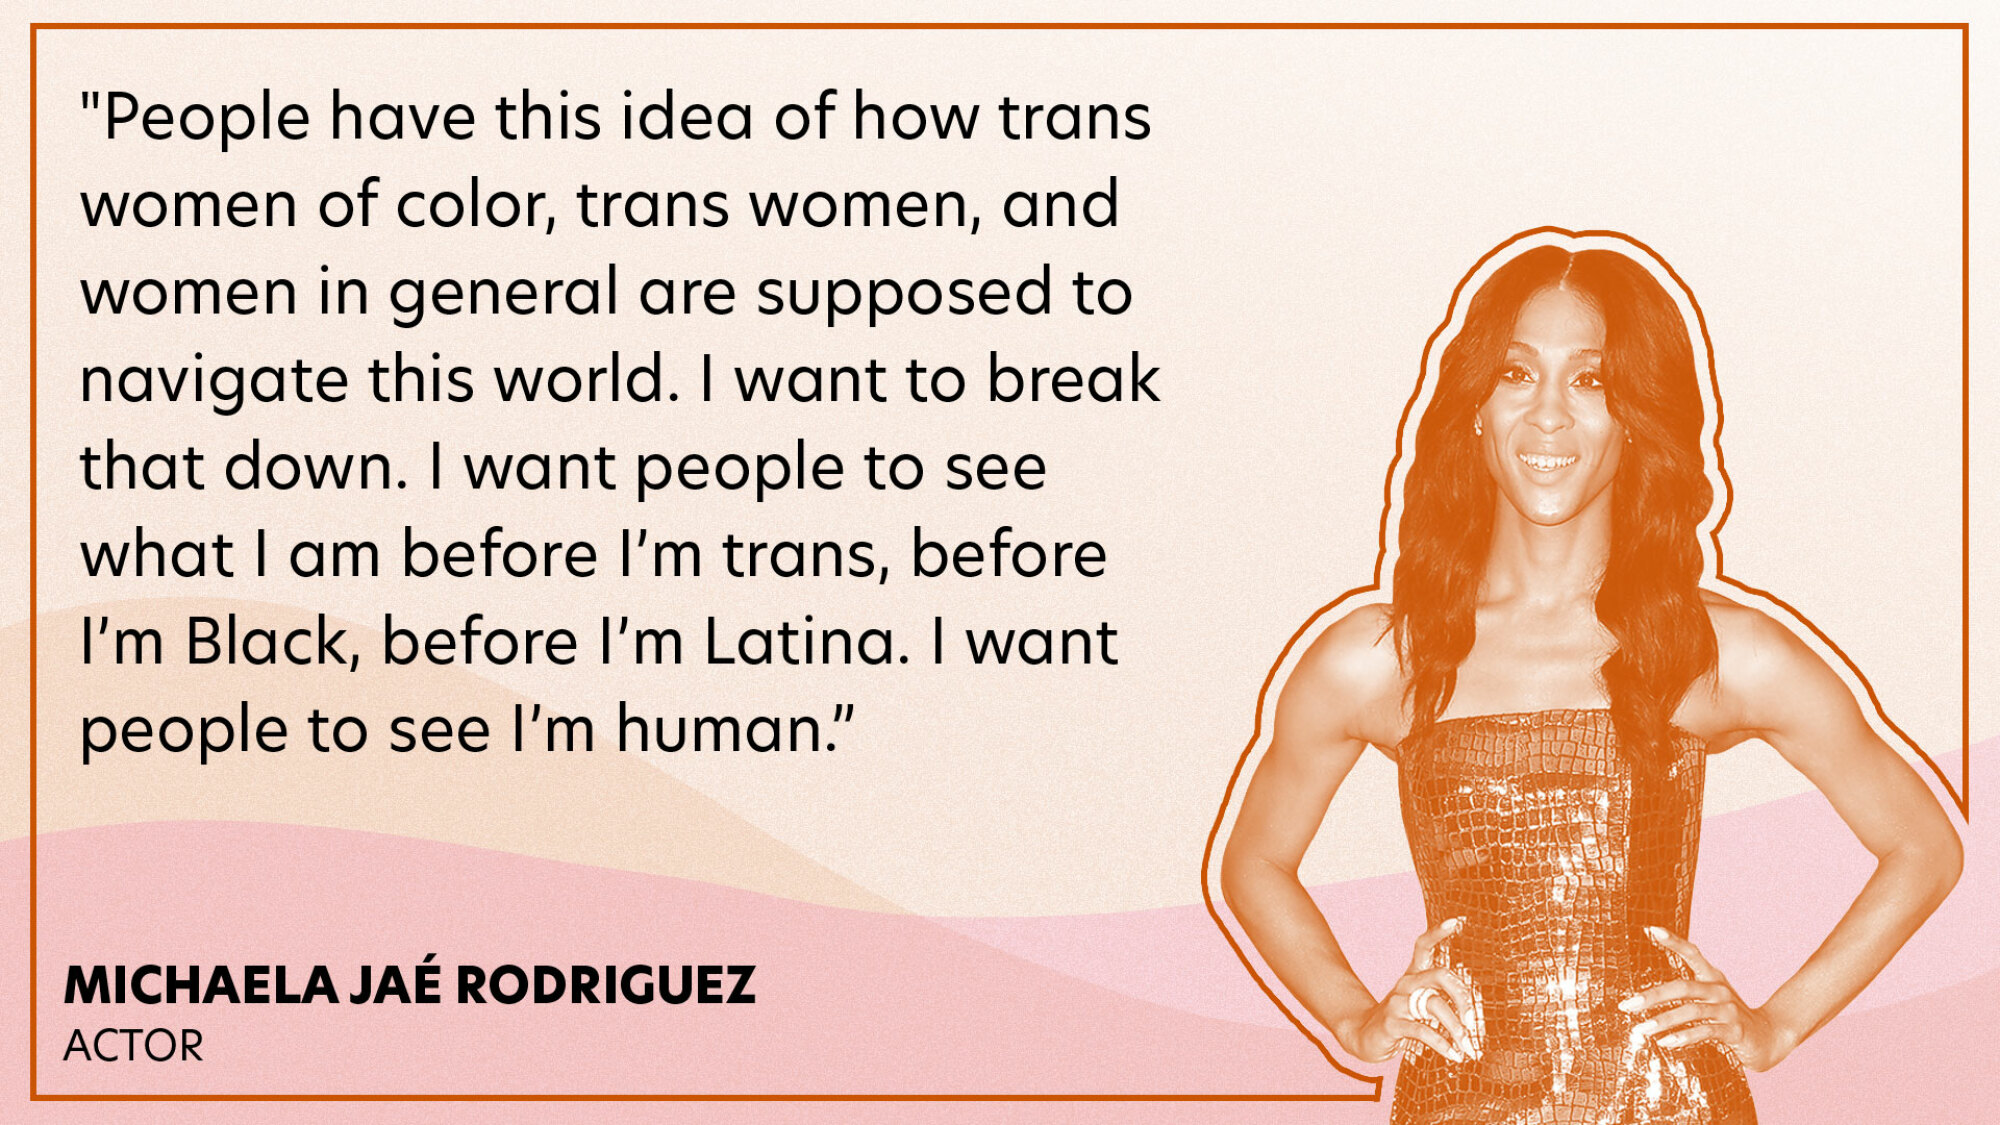 "People have this idea of how trans women of color, trans women, and women in general are supposed to navigate this world. I want to break that down. I want people to see what I am before I’m trans, before I’m Black, before I’m Latina. I want people to see I’m human."